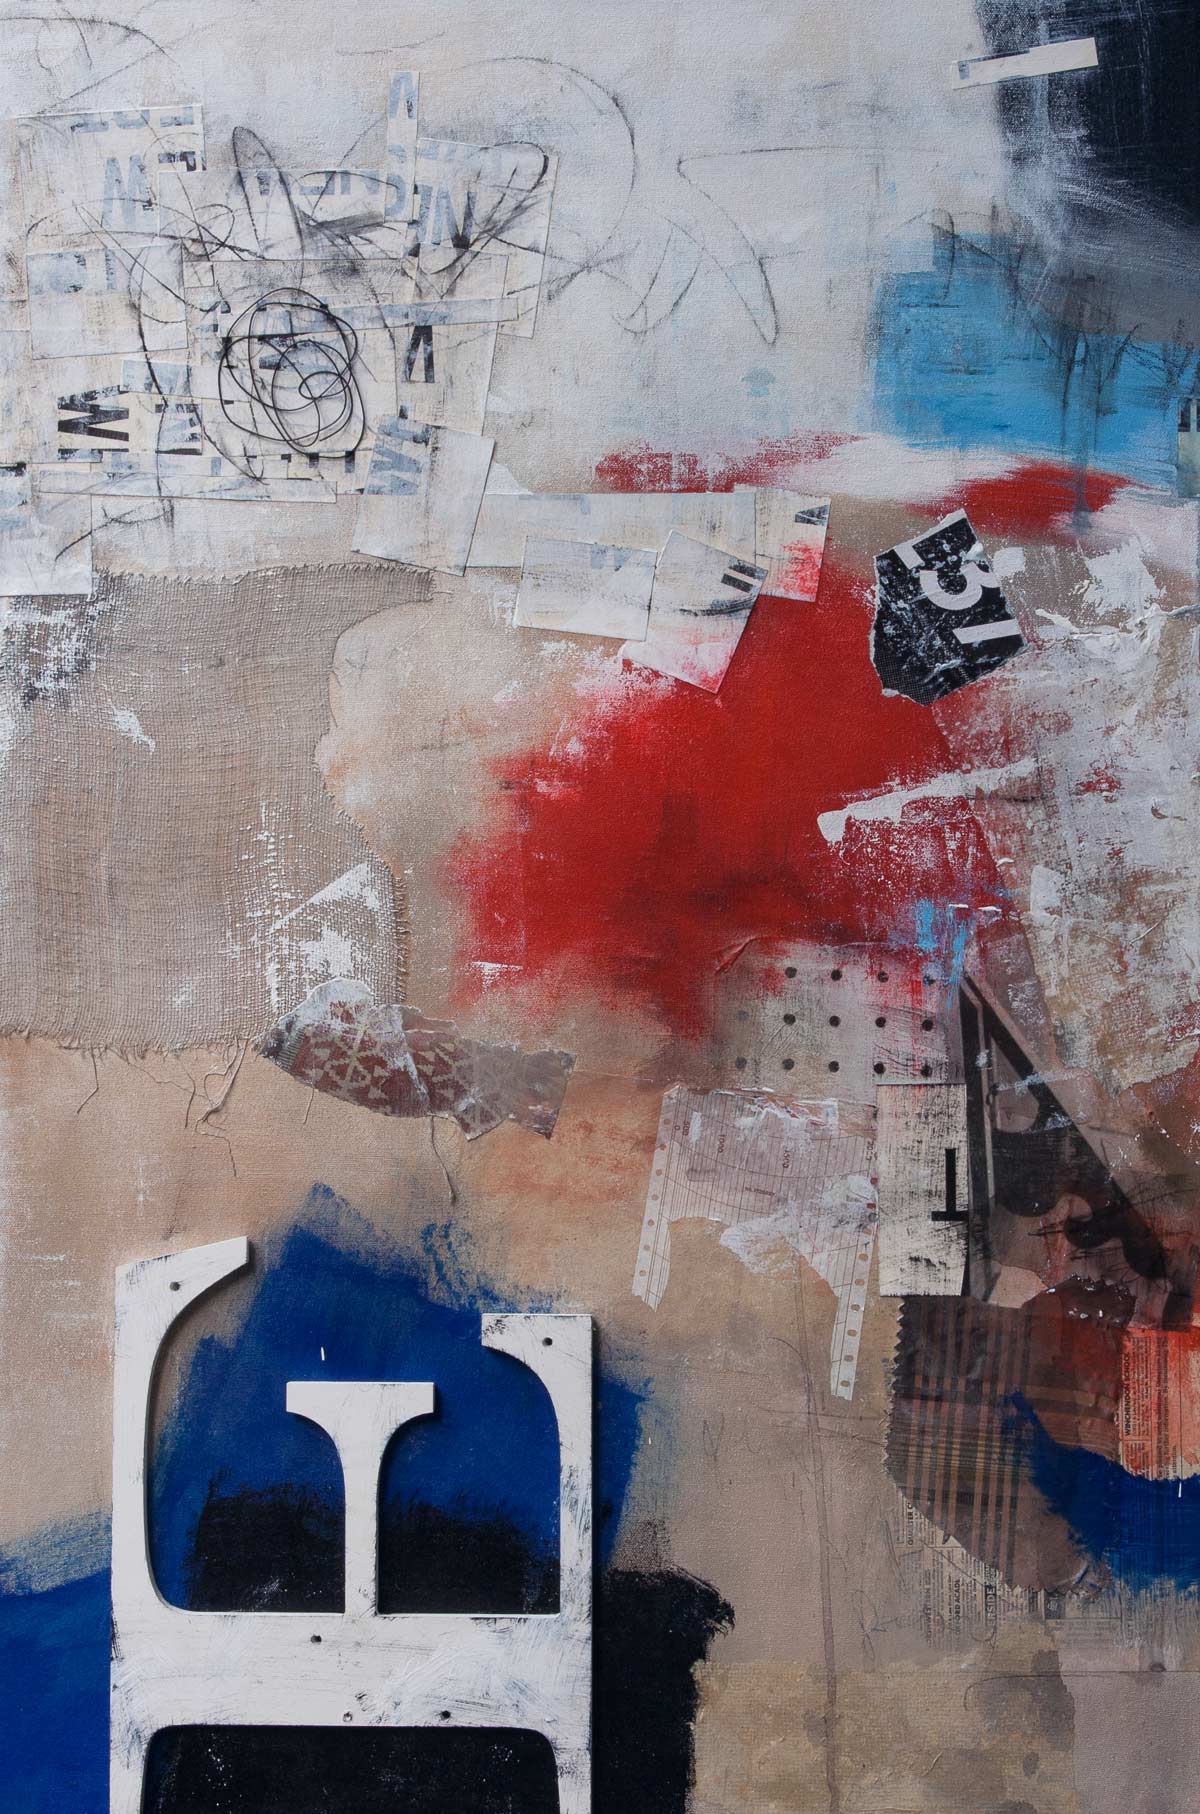 State of Affairs, 2015, mixed media on canvas, 24" x 36"